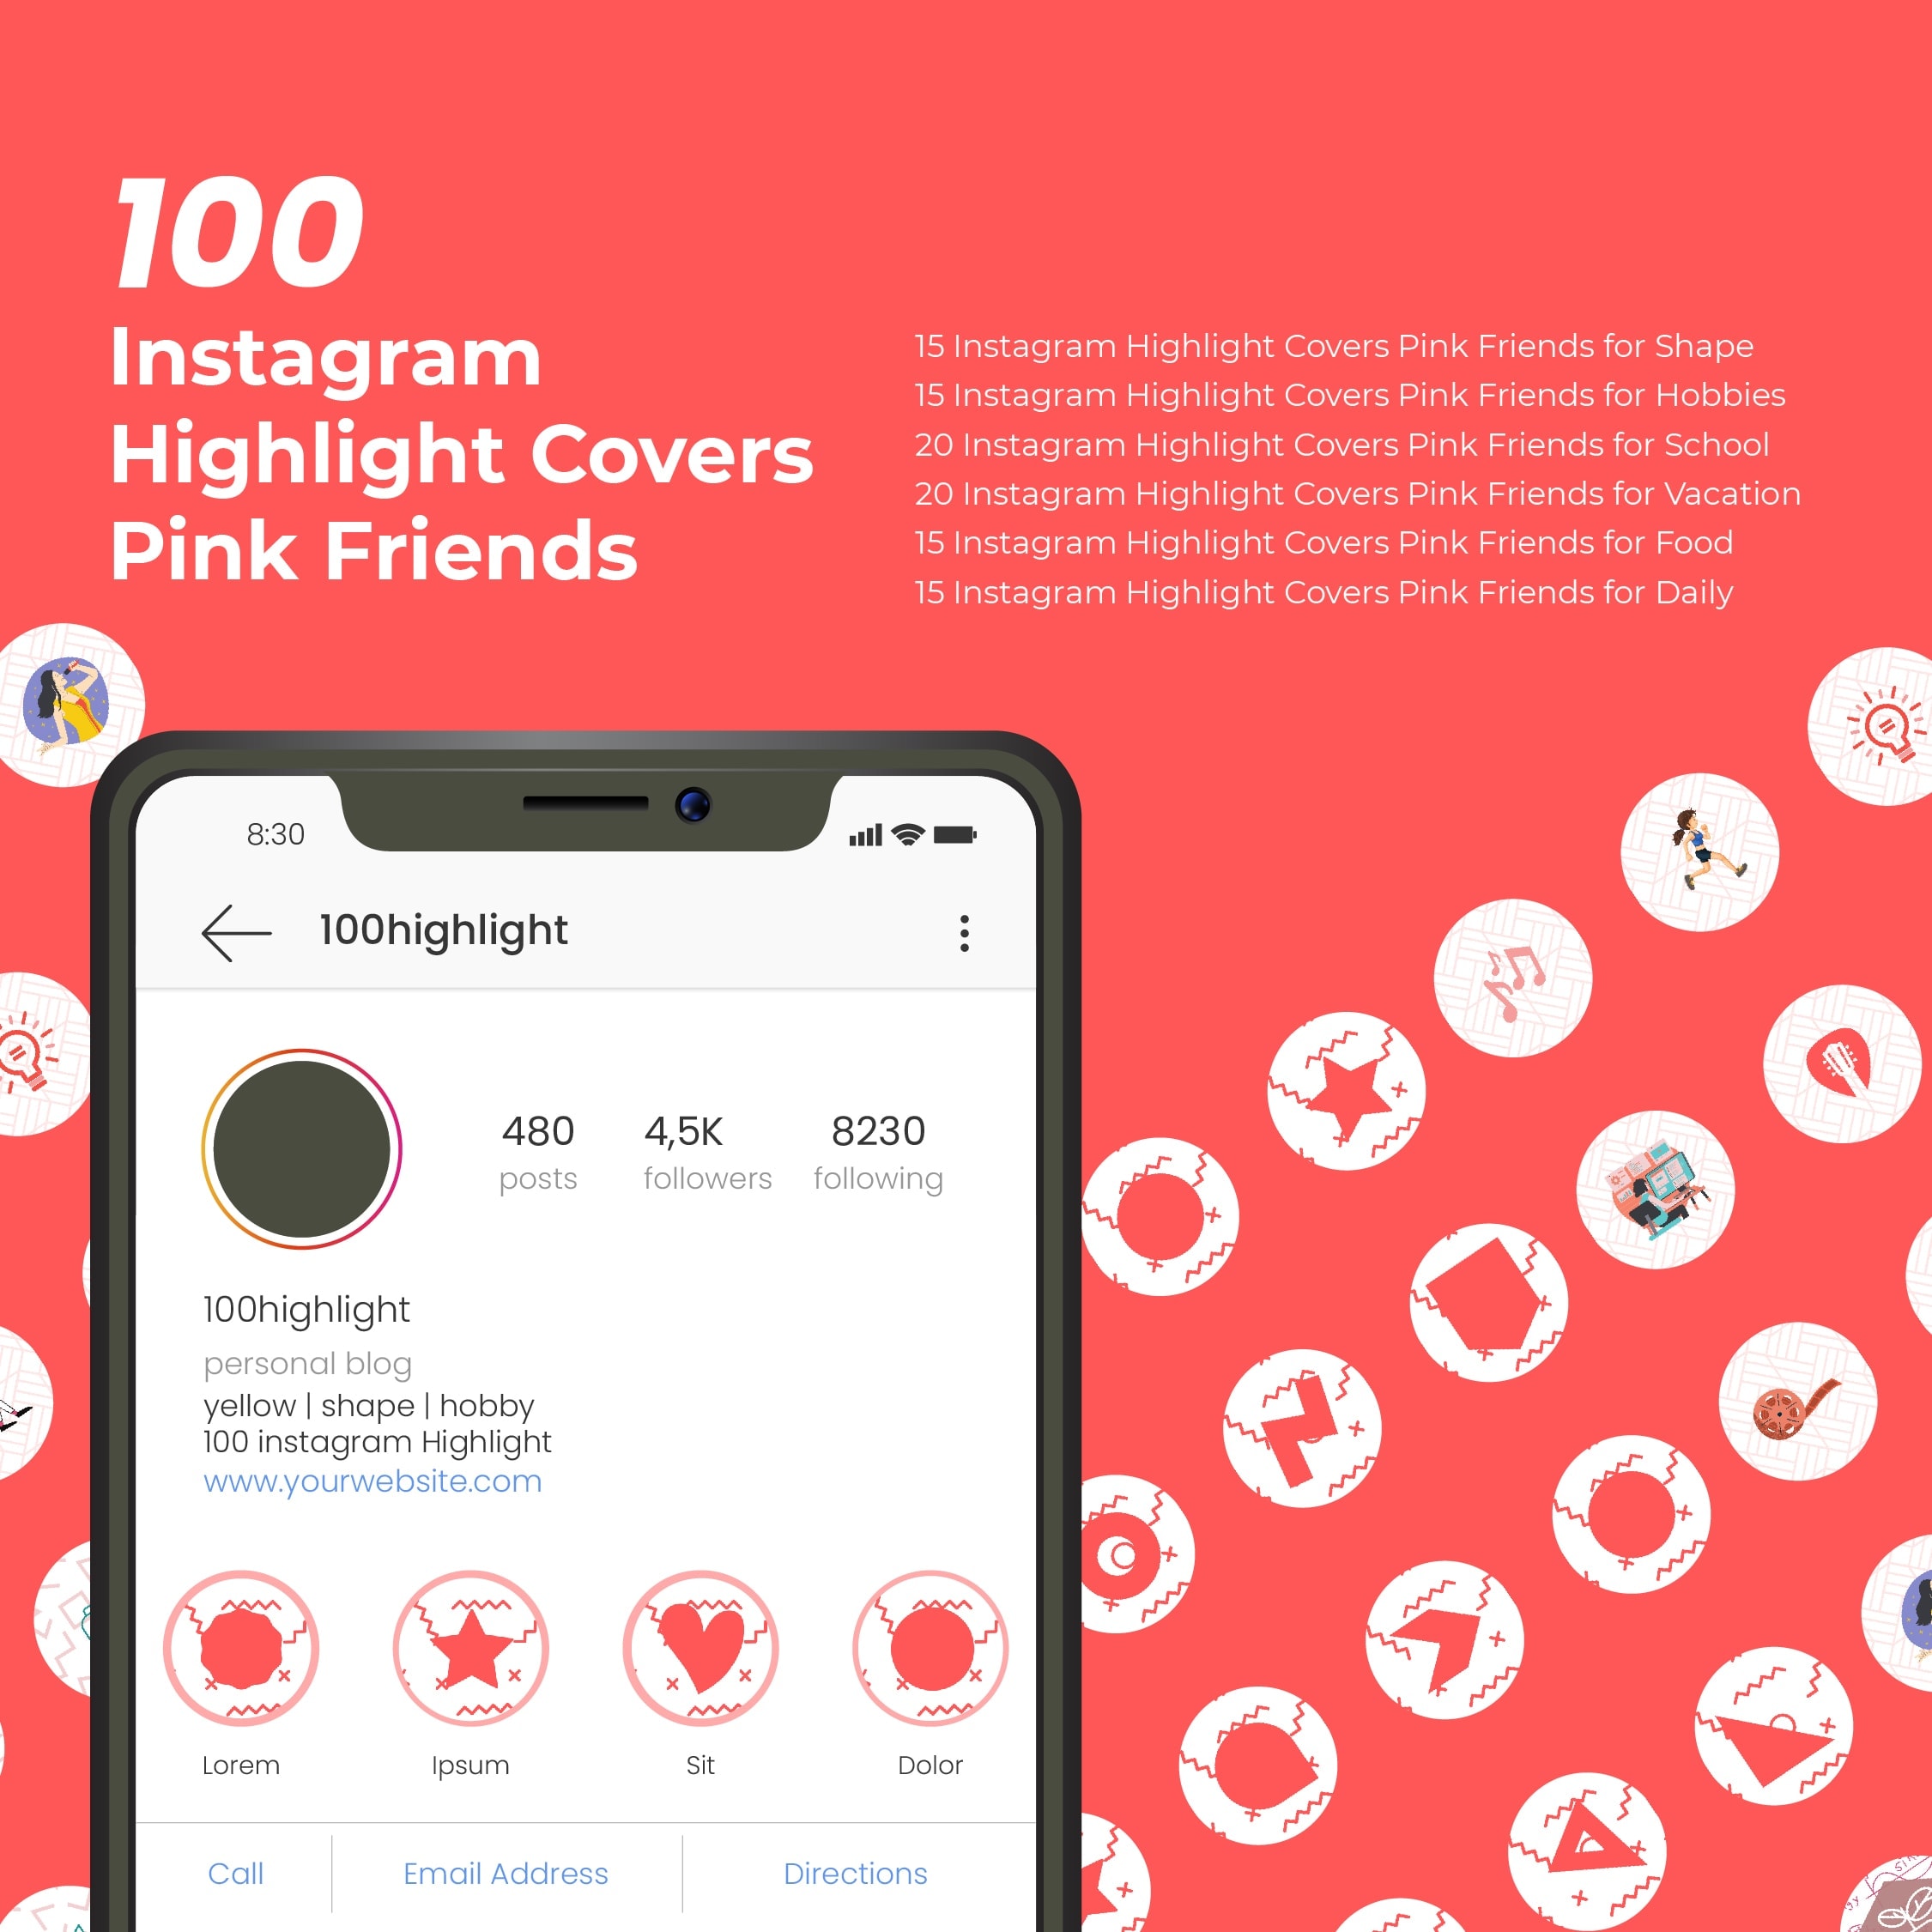 instagram highlight covers pink friends